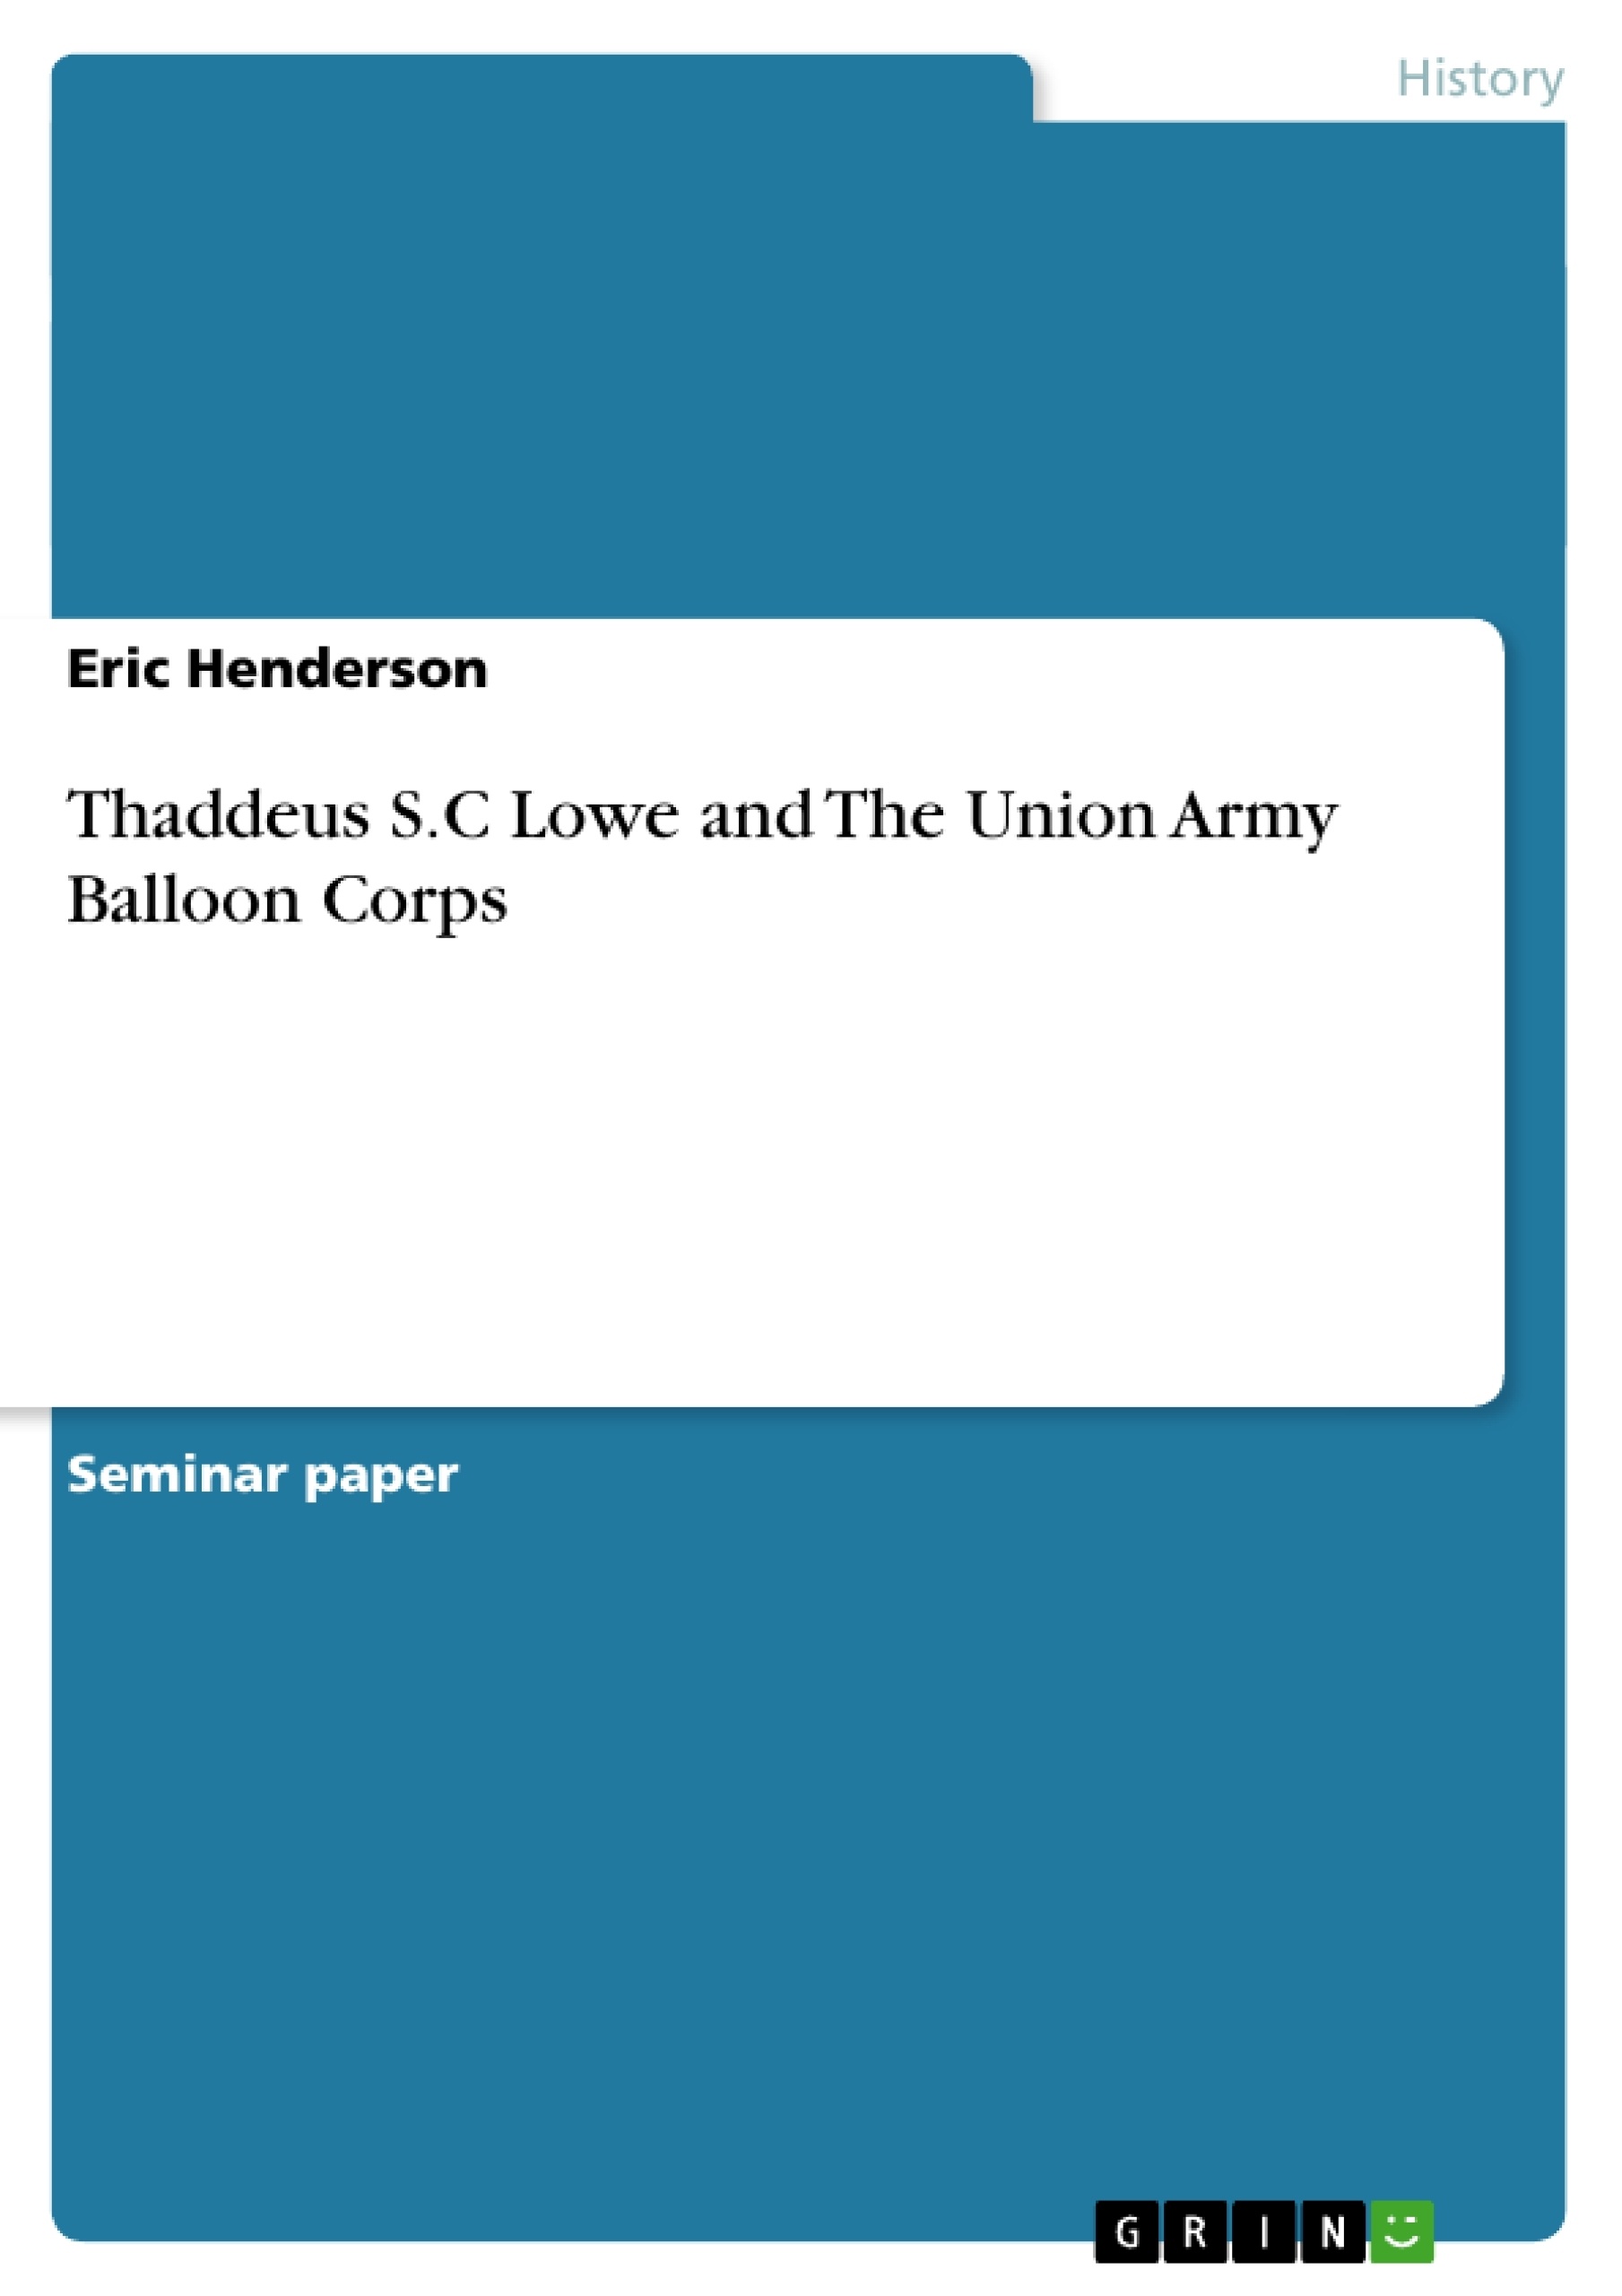 Title: Thaddeus S.C Lowe and The Union Army Balloon Corps